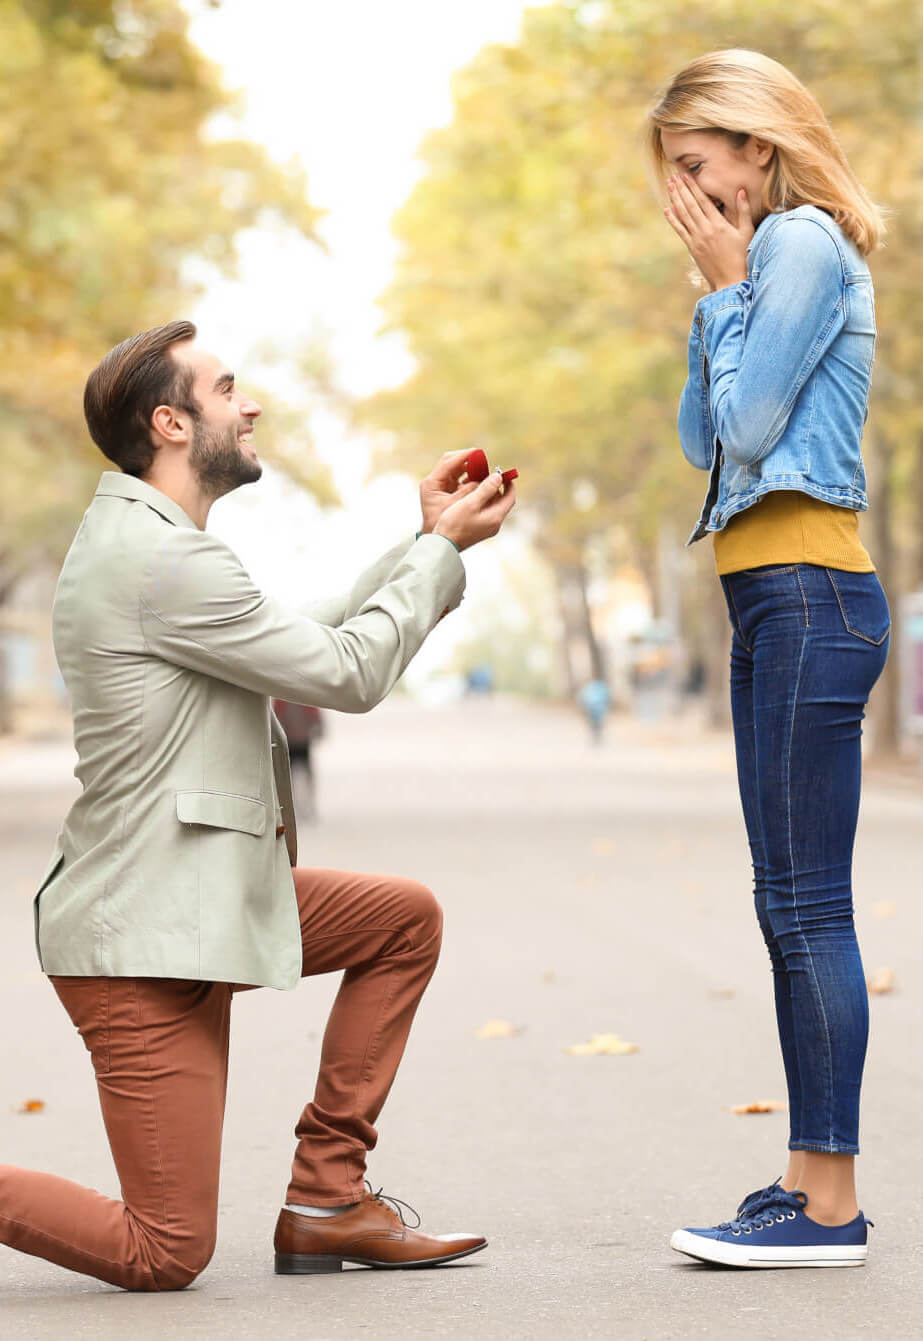 Image of girl proposing to man. Fiance Visa Lawyers at Shihab Burke, LLC, Attorneys At Law.